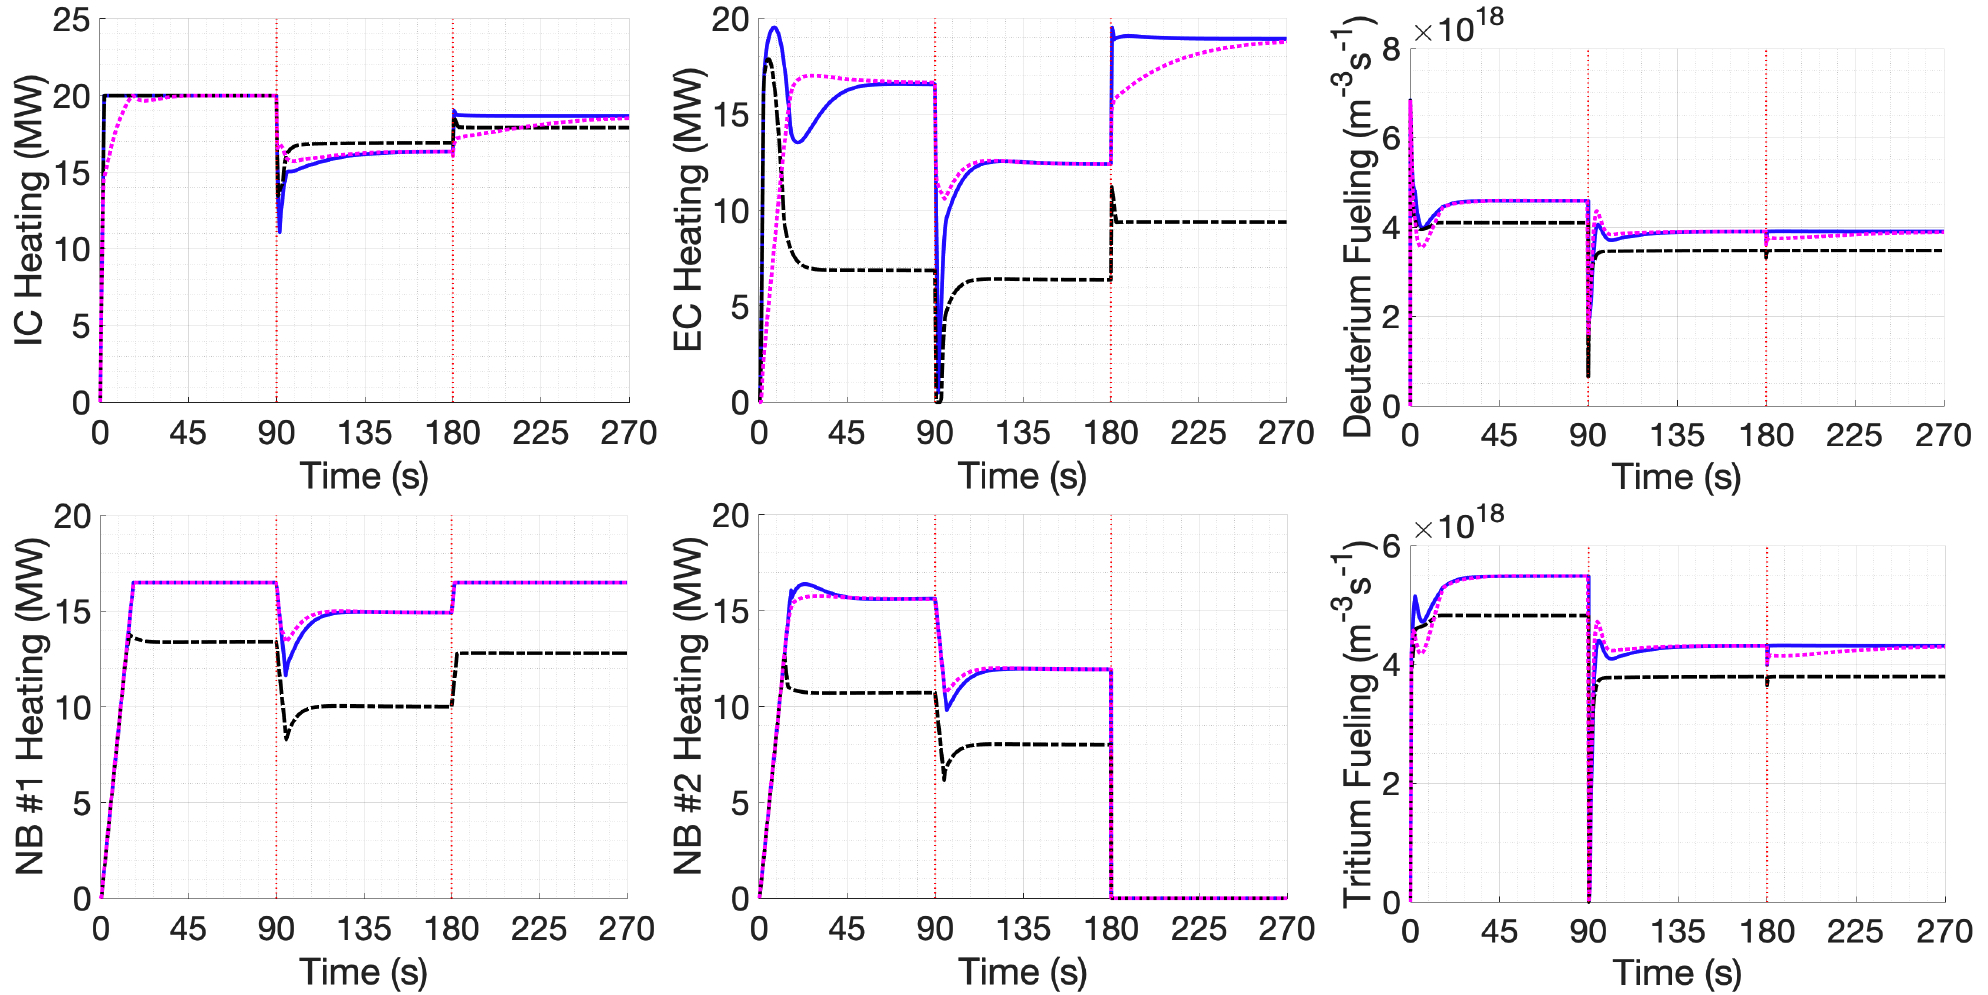 Time evolutions of the heating and fueling actuators under adaptive control with QP CA (blue solid), non-adaptive control with QP CA (black dashed-dotted), and adaptive control with pseudo-inverse CA (magenta dotted) are presented.